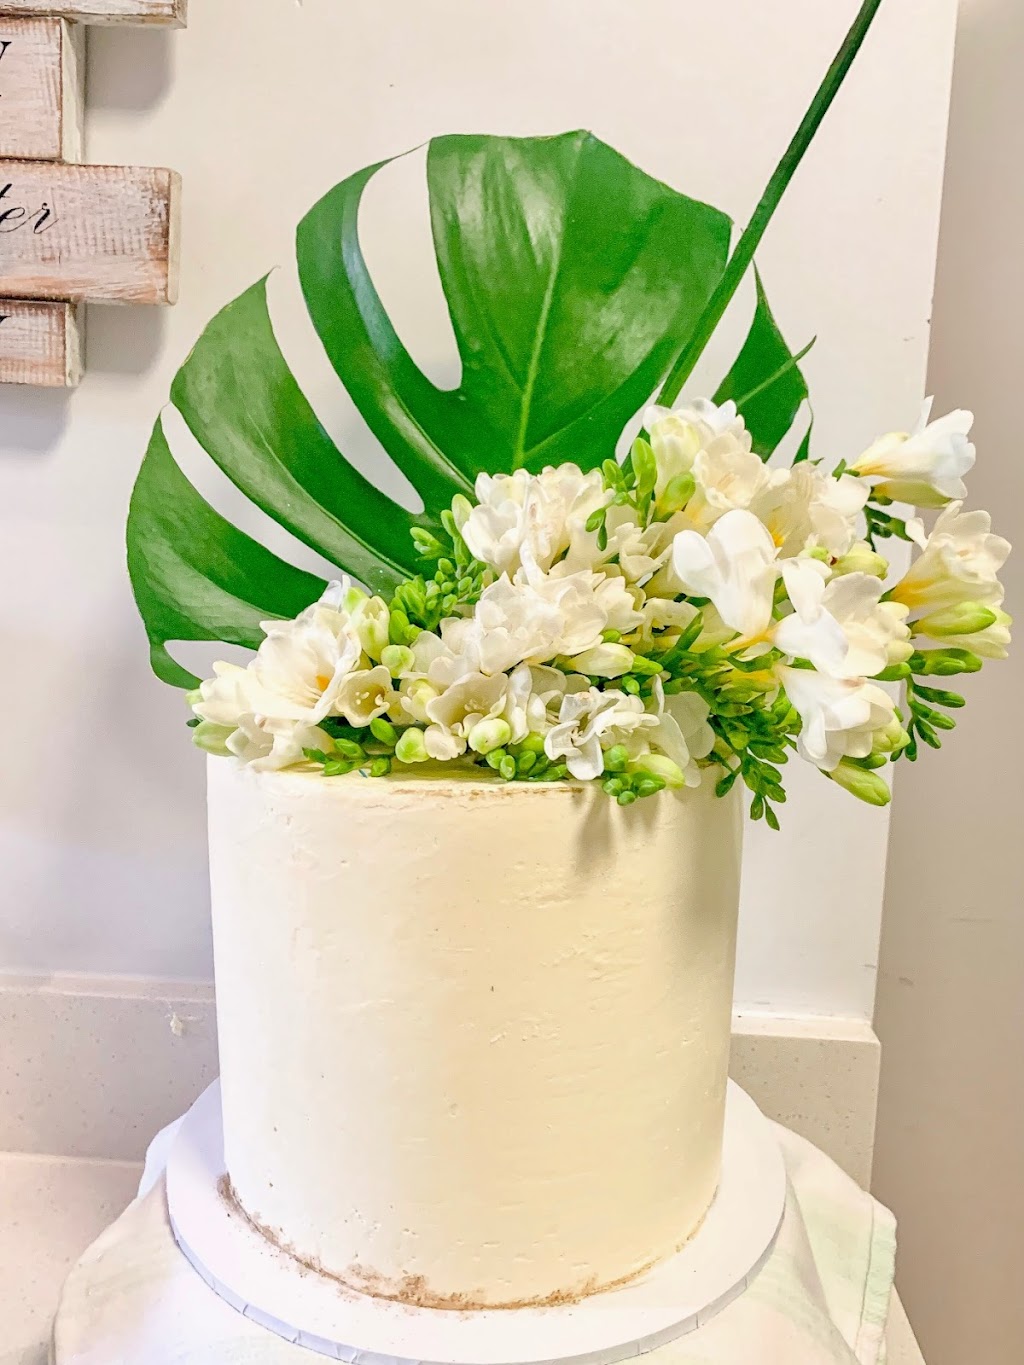 Philosophie Couture Cakes | bakery | 1079 Barrenjoey Rd, Palm Beach NSW 2108, Australia | 0450080212 OR +61 450 080 212